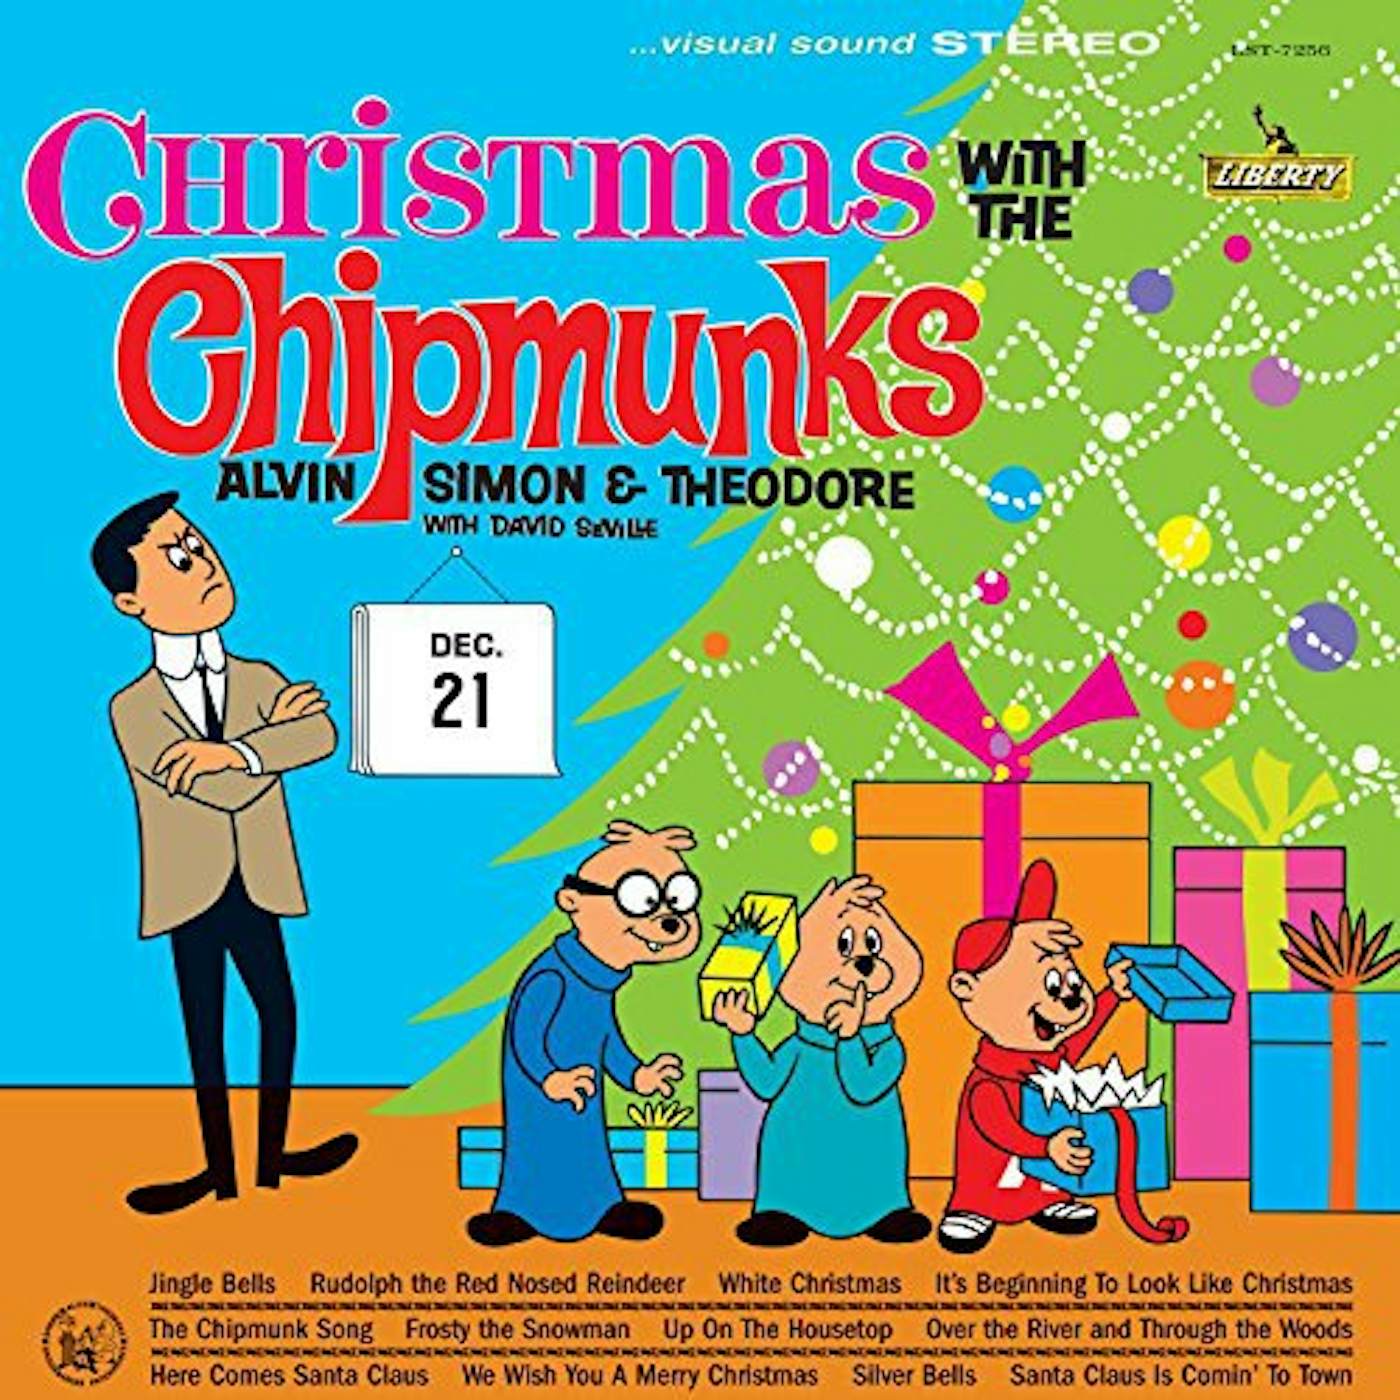 Christmas With Alvin and the Chipmunks Vinyl Record